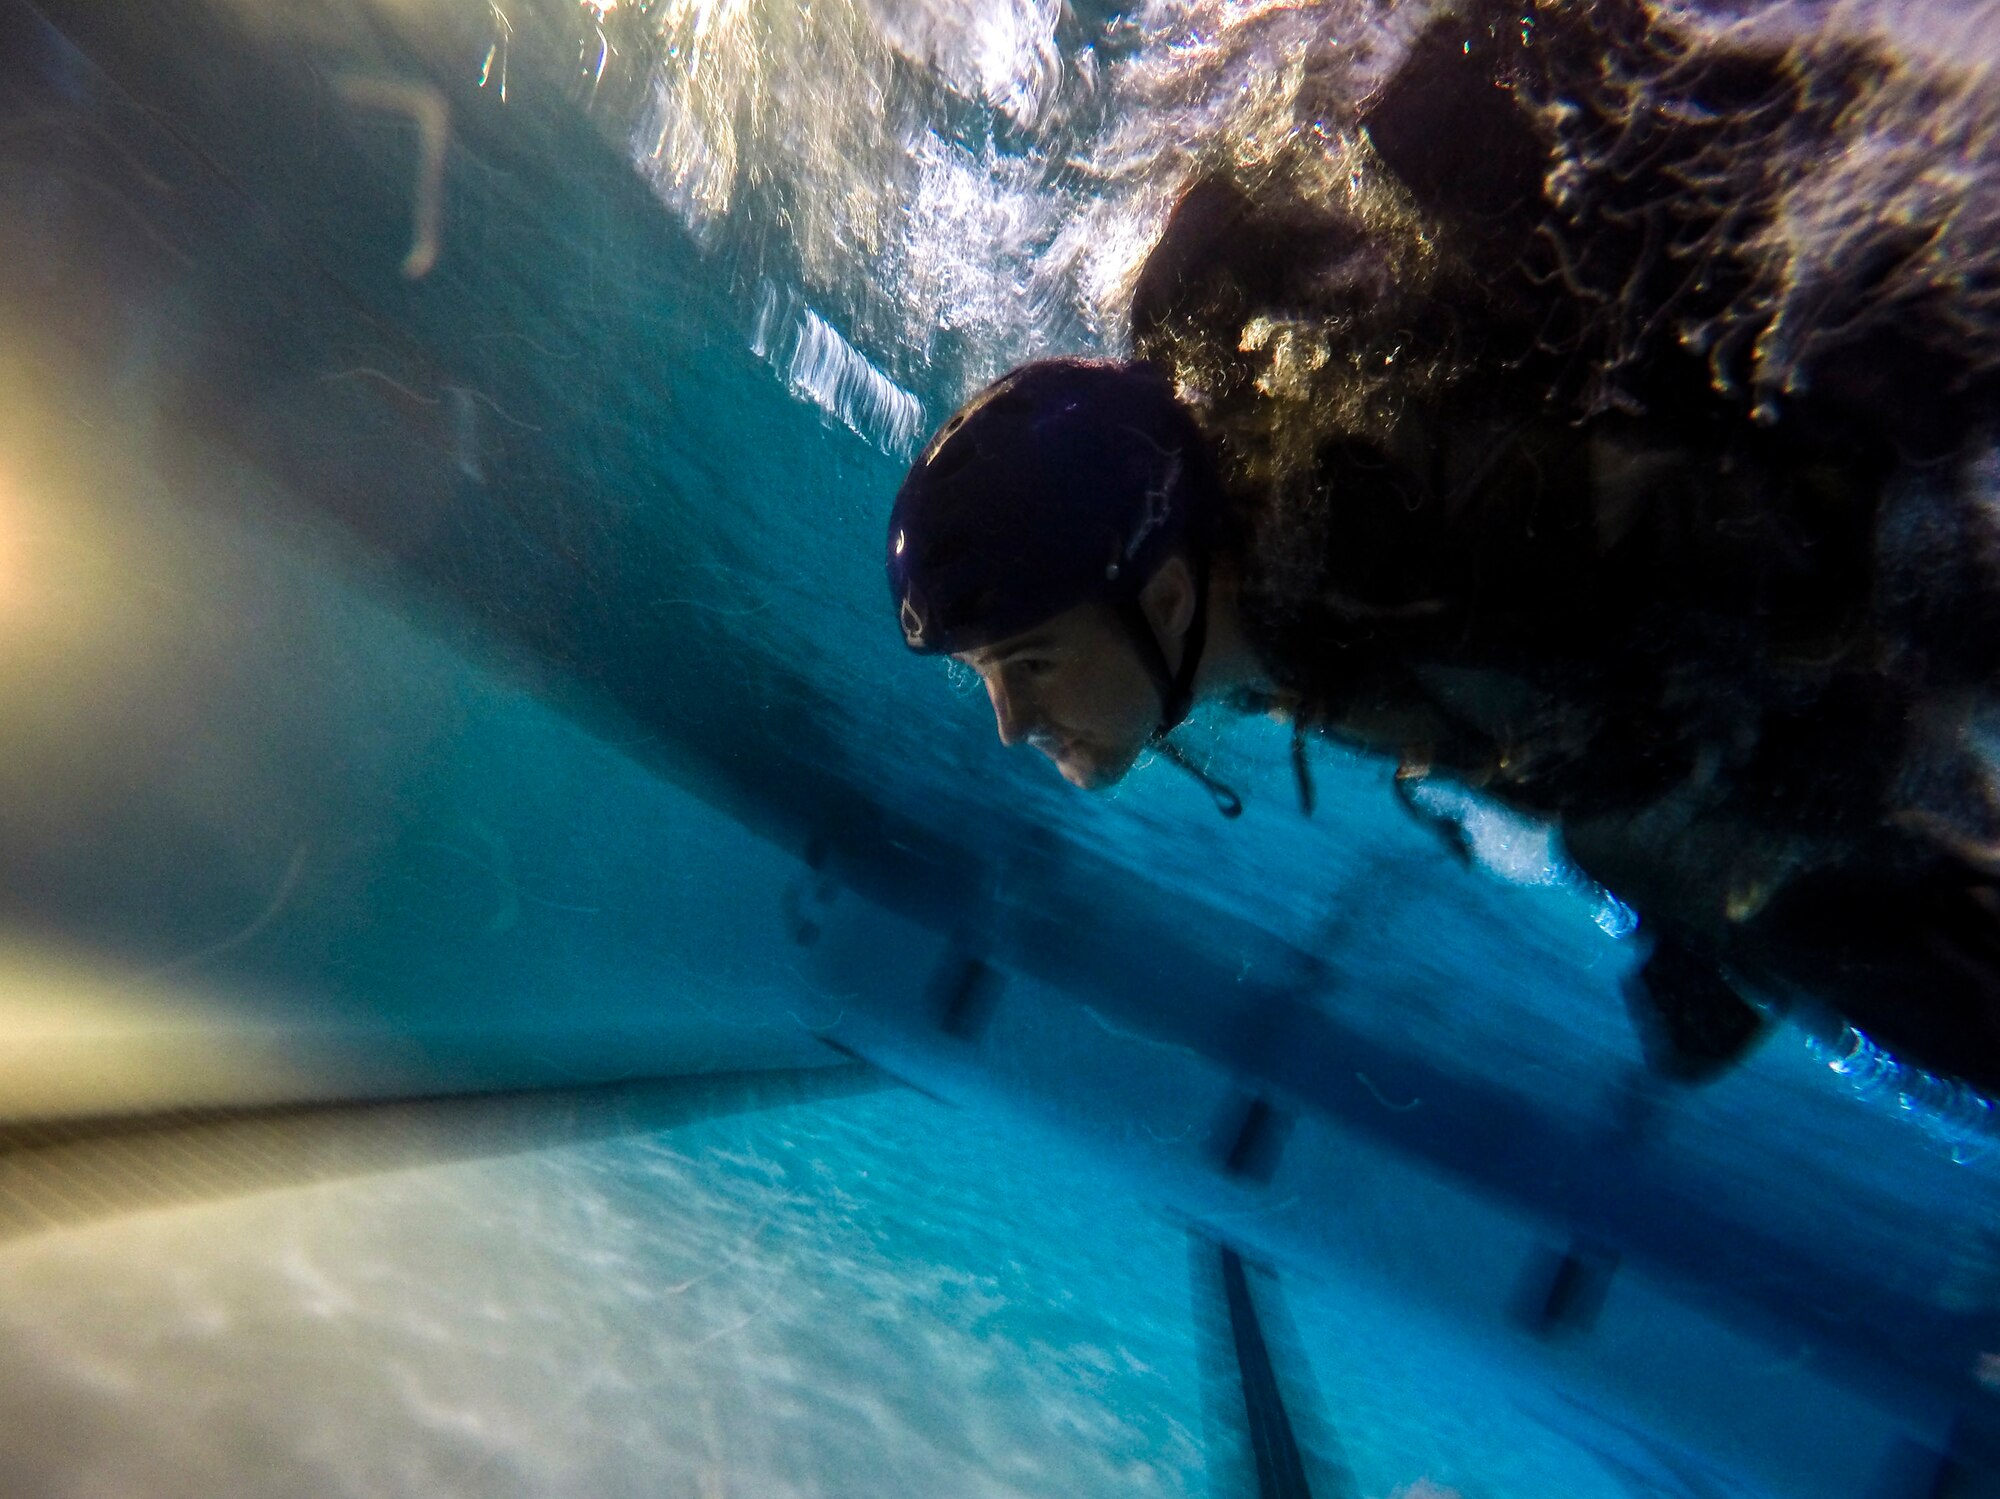 U.S. Air Force Senior Master Sgt. Scott Shier, 71st Rescue Squadron loadmaster, swims during a parachute line scenario during water survival training, Sept. 15, 2016, at Moody Air Force Base, Ga. Survival, Evasion, resistance and escape specialists from the 347th Operations Support Squadron are responsible for familiarizing aircrews with survival equipment and proper techniques to survive in water in the event of ejecting from an aircraft. (U.S. Air Force photo by Airman 1st Class Daniel Snider)